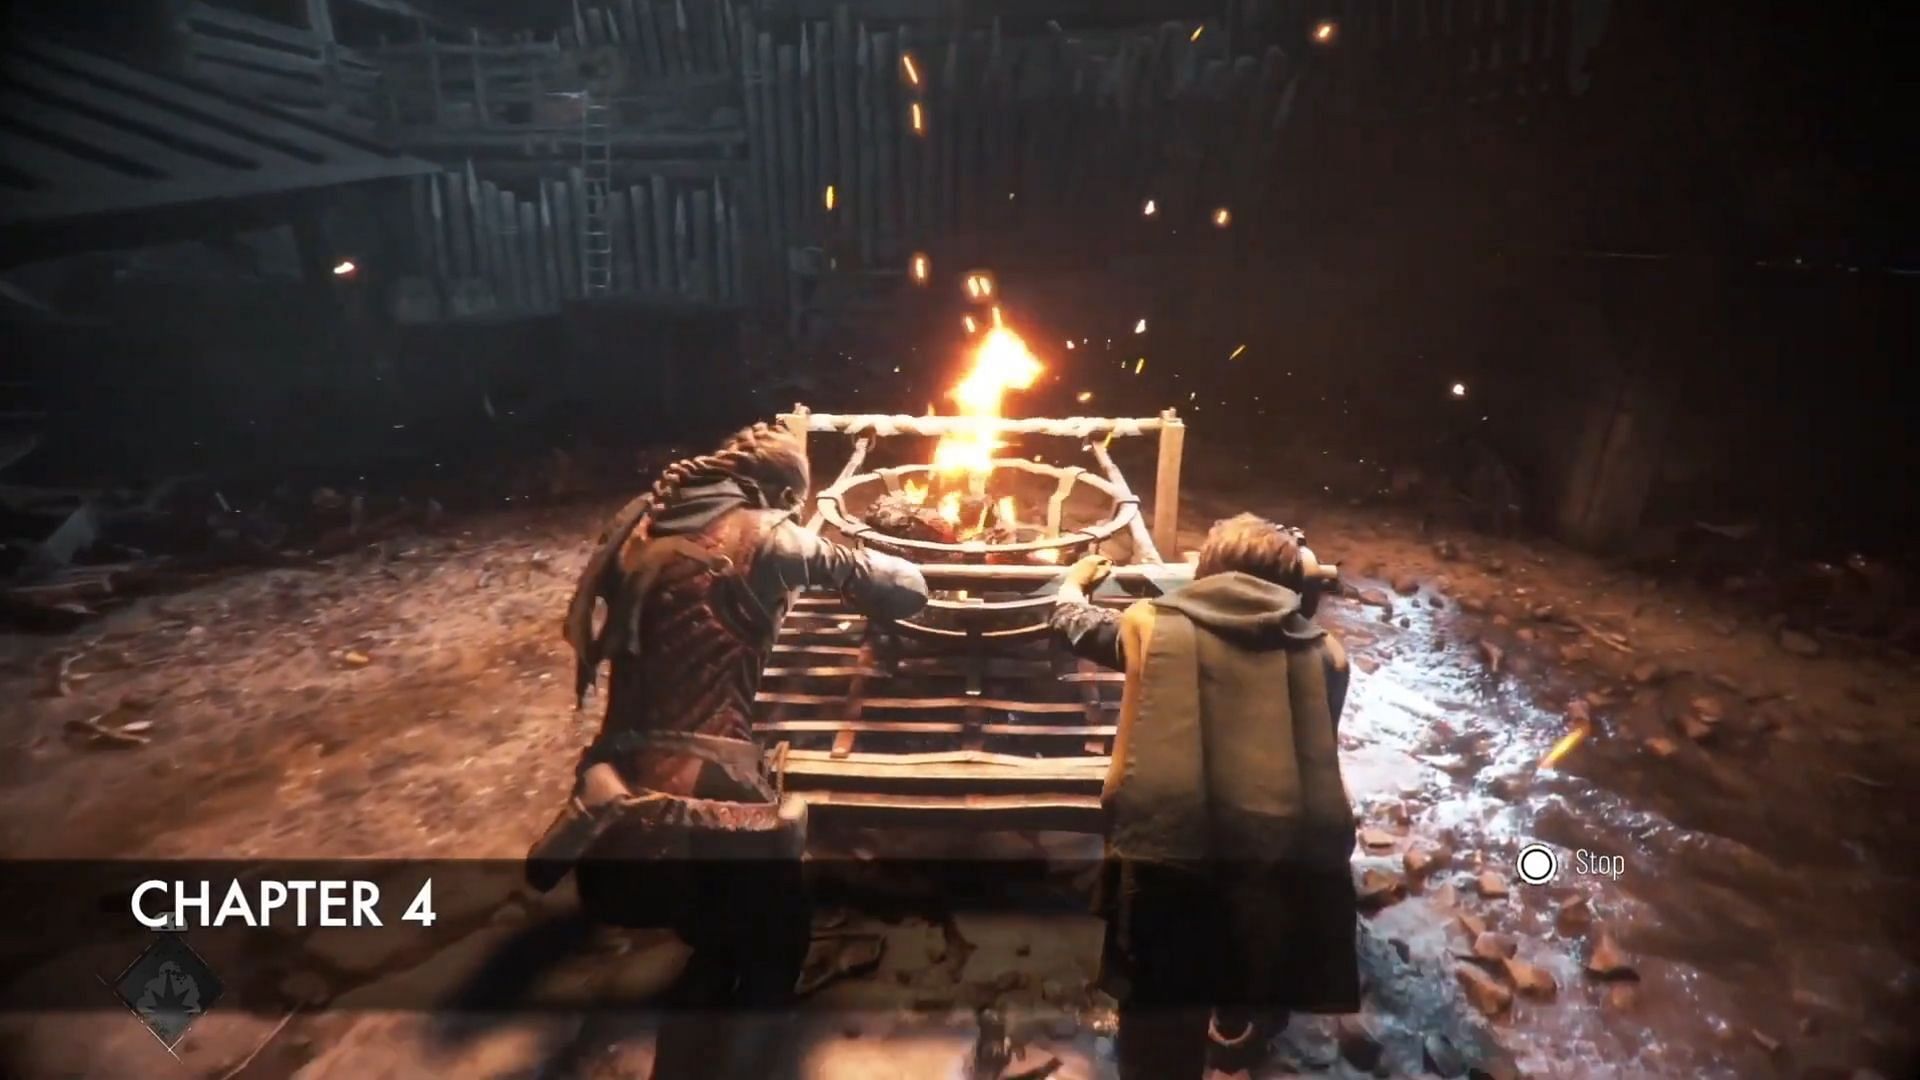 How do you save the goat in chapter 9 of A Plague Tale: Requiem?